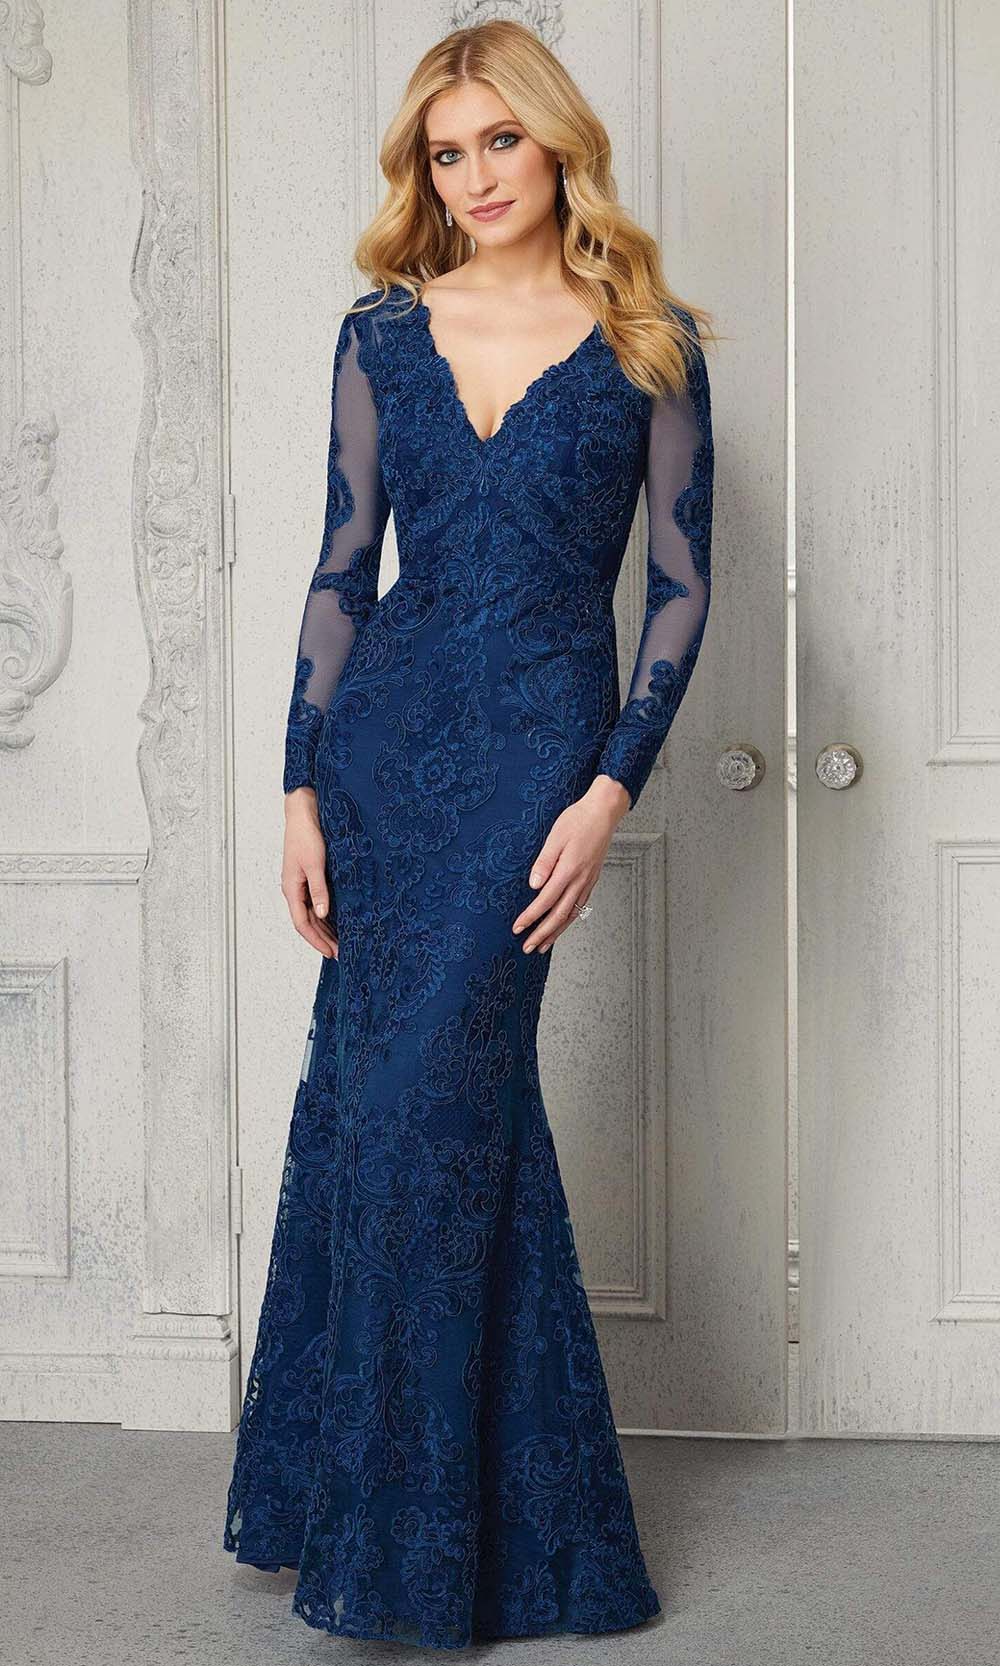 MGNY By Mori Lee - 72402 Embroidered V-Neck Sheath Dress Mother of the Bride Dresses 00 / Navy